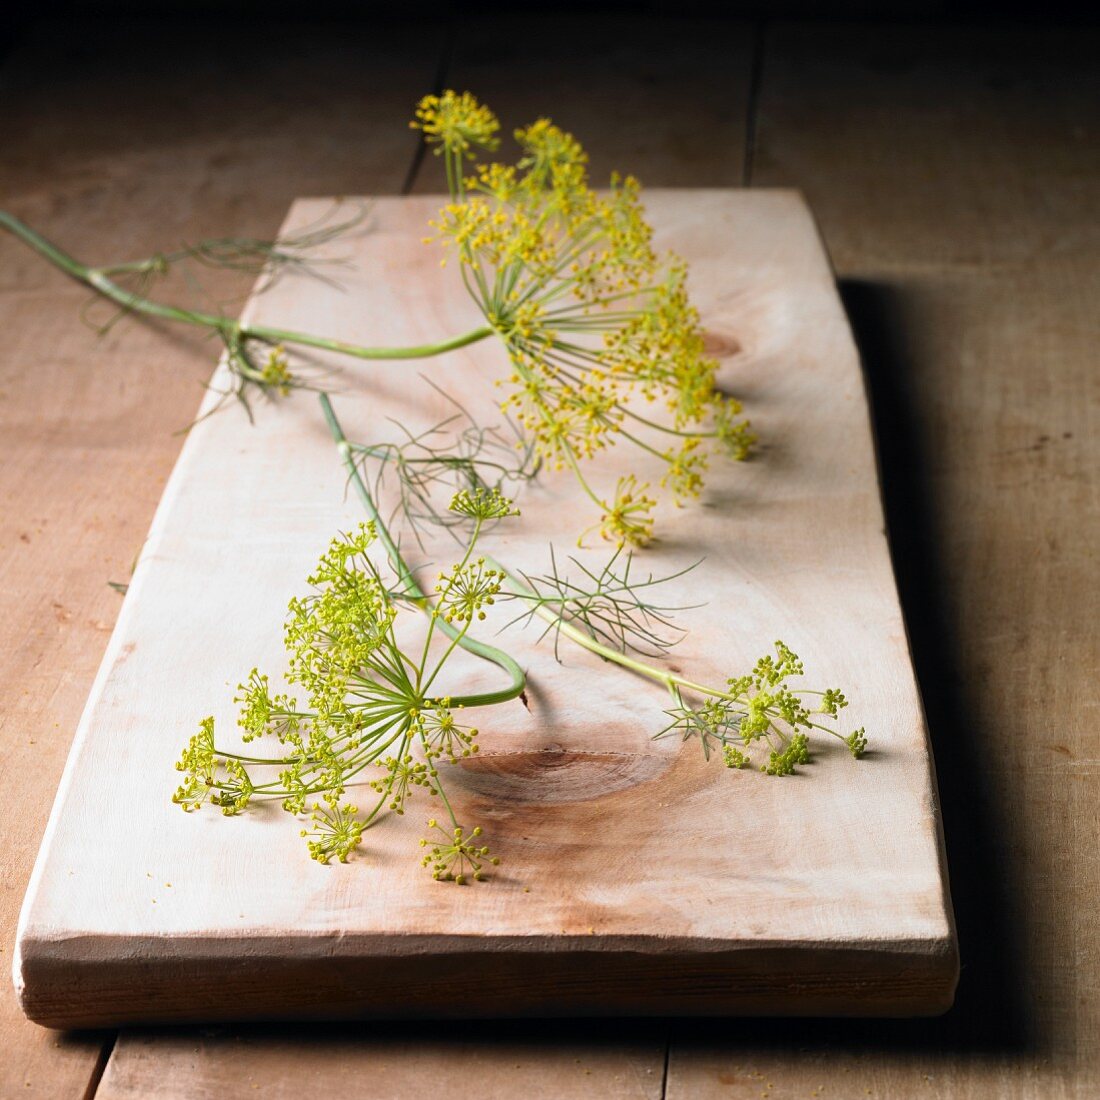 Dill flowers on a wooden board